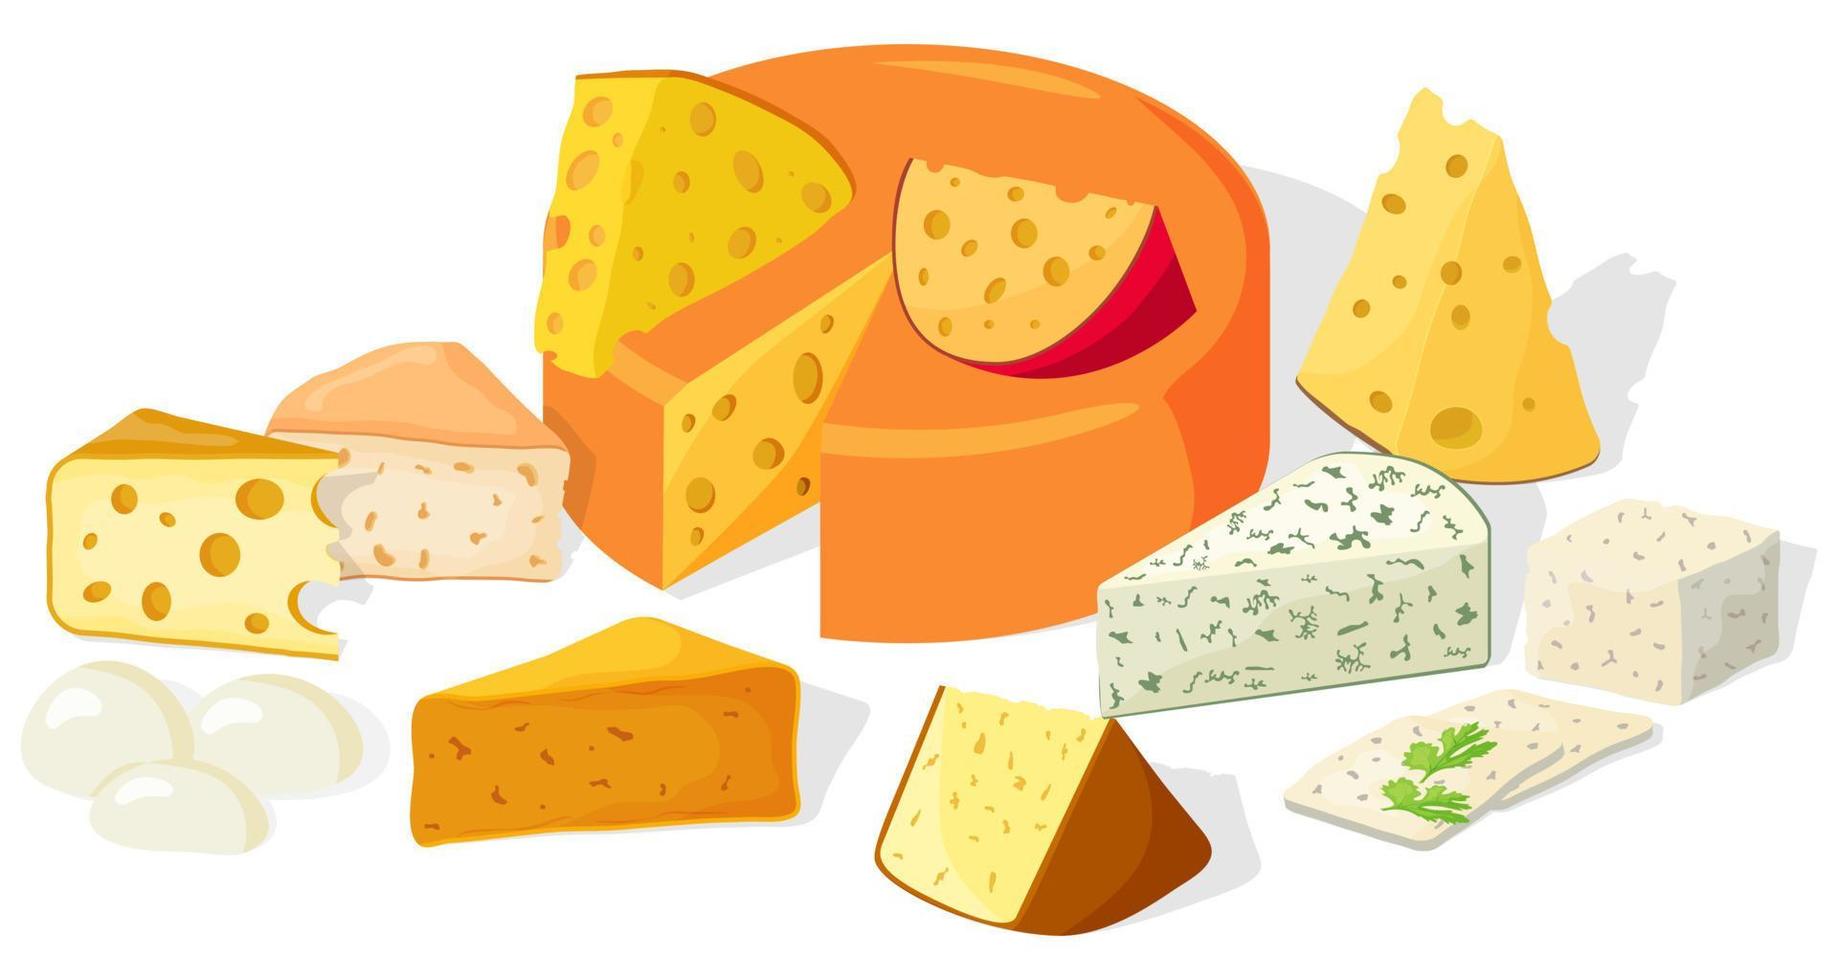 A set of picturesquely arranged pieces of various cheeses.Cheddar ,mozzarella, maasdam,brie, roquefort, gouda, feta and parmesan.Cut into triangles and slices of delicious cheeses. vector